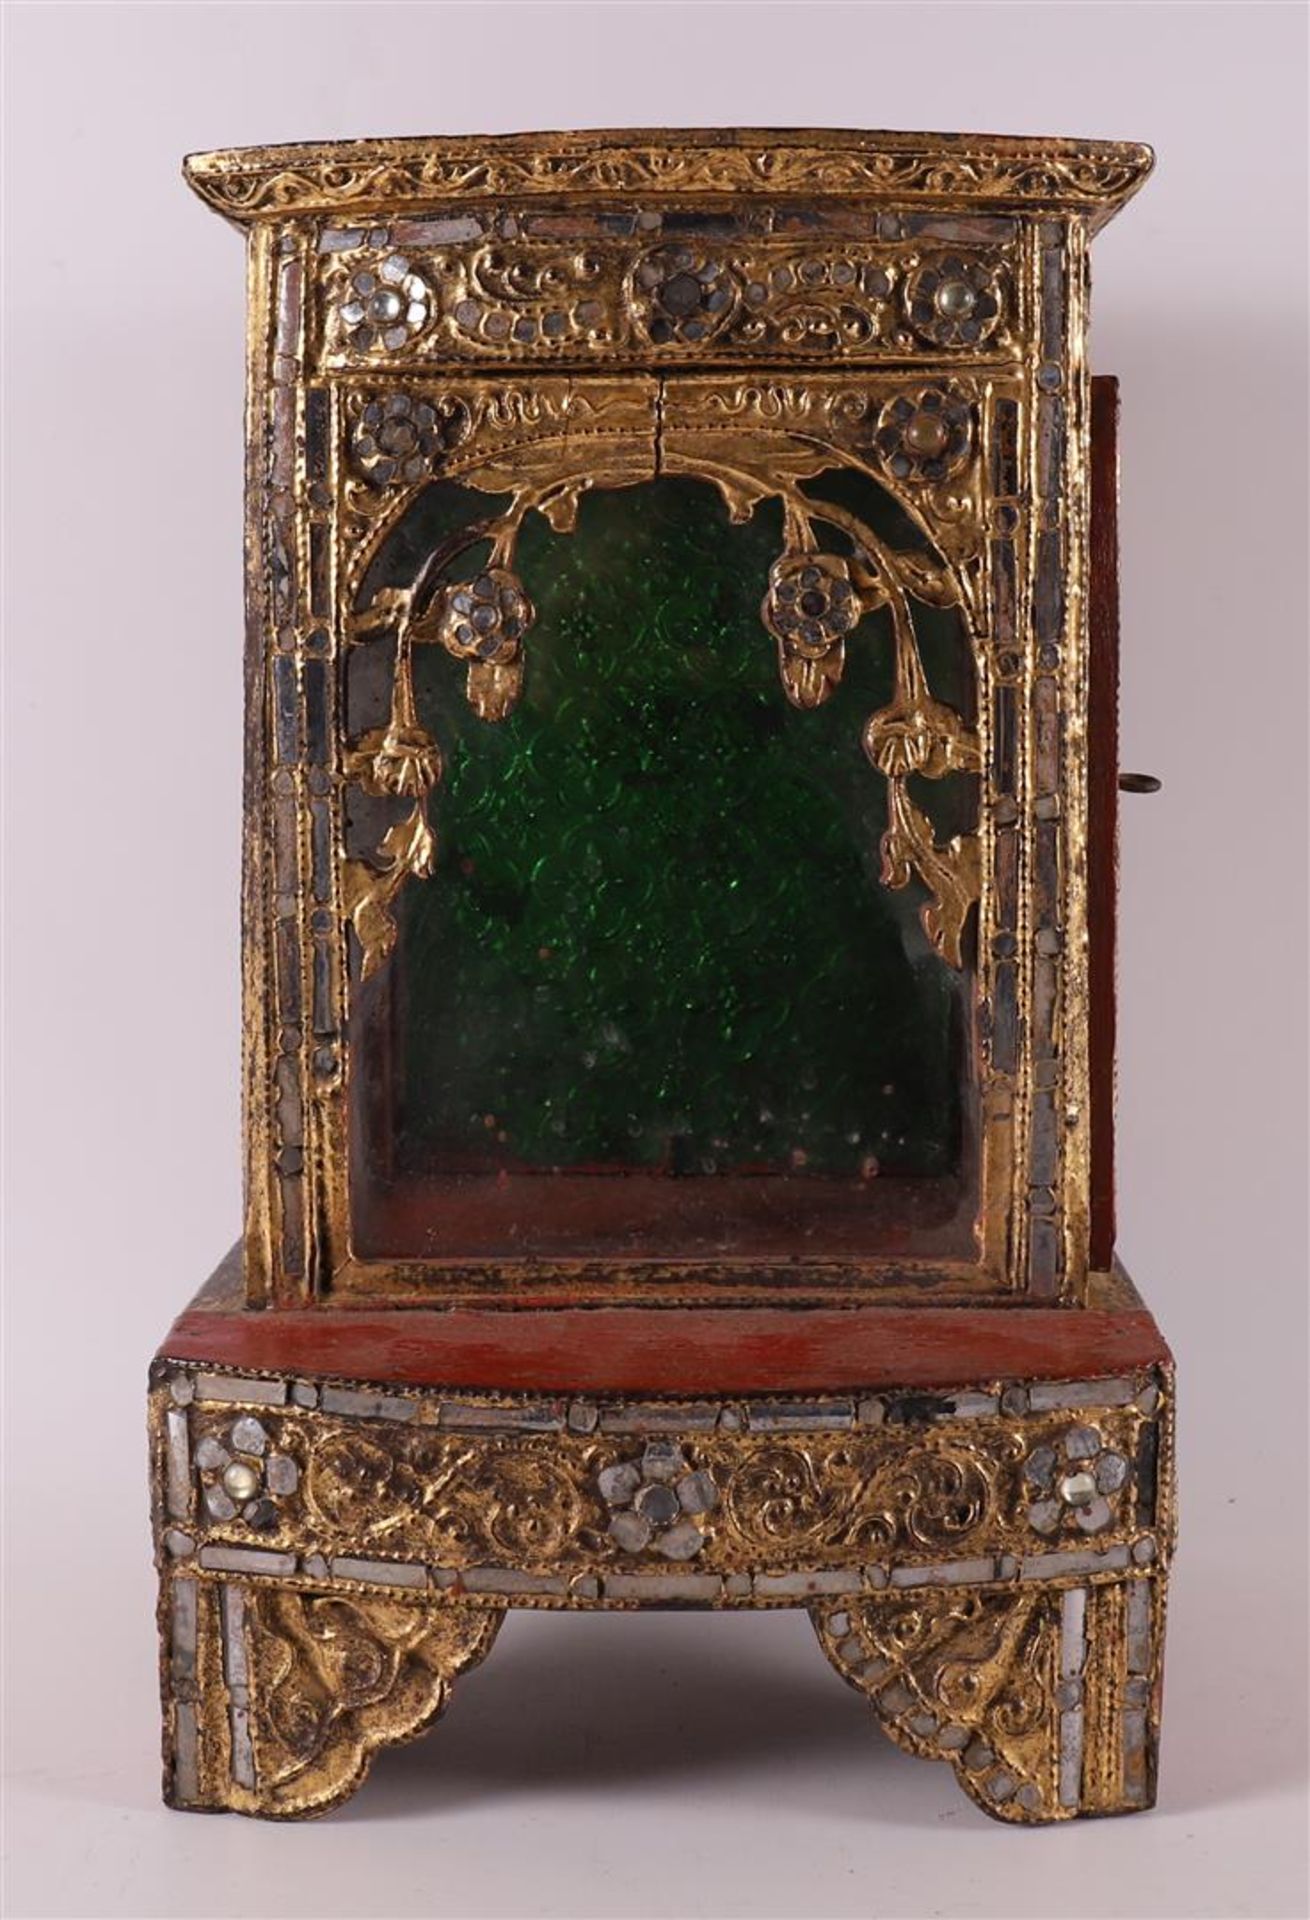 A gilded metal relic display cabinet, China 19th/20th century.